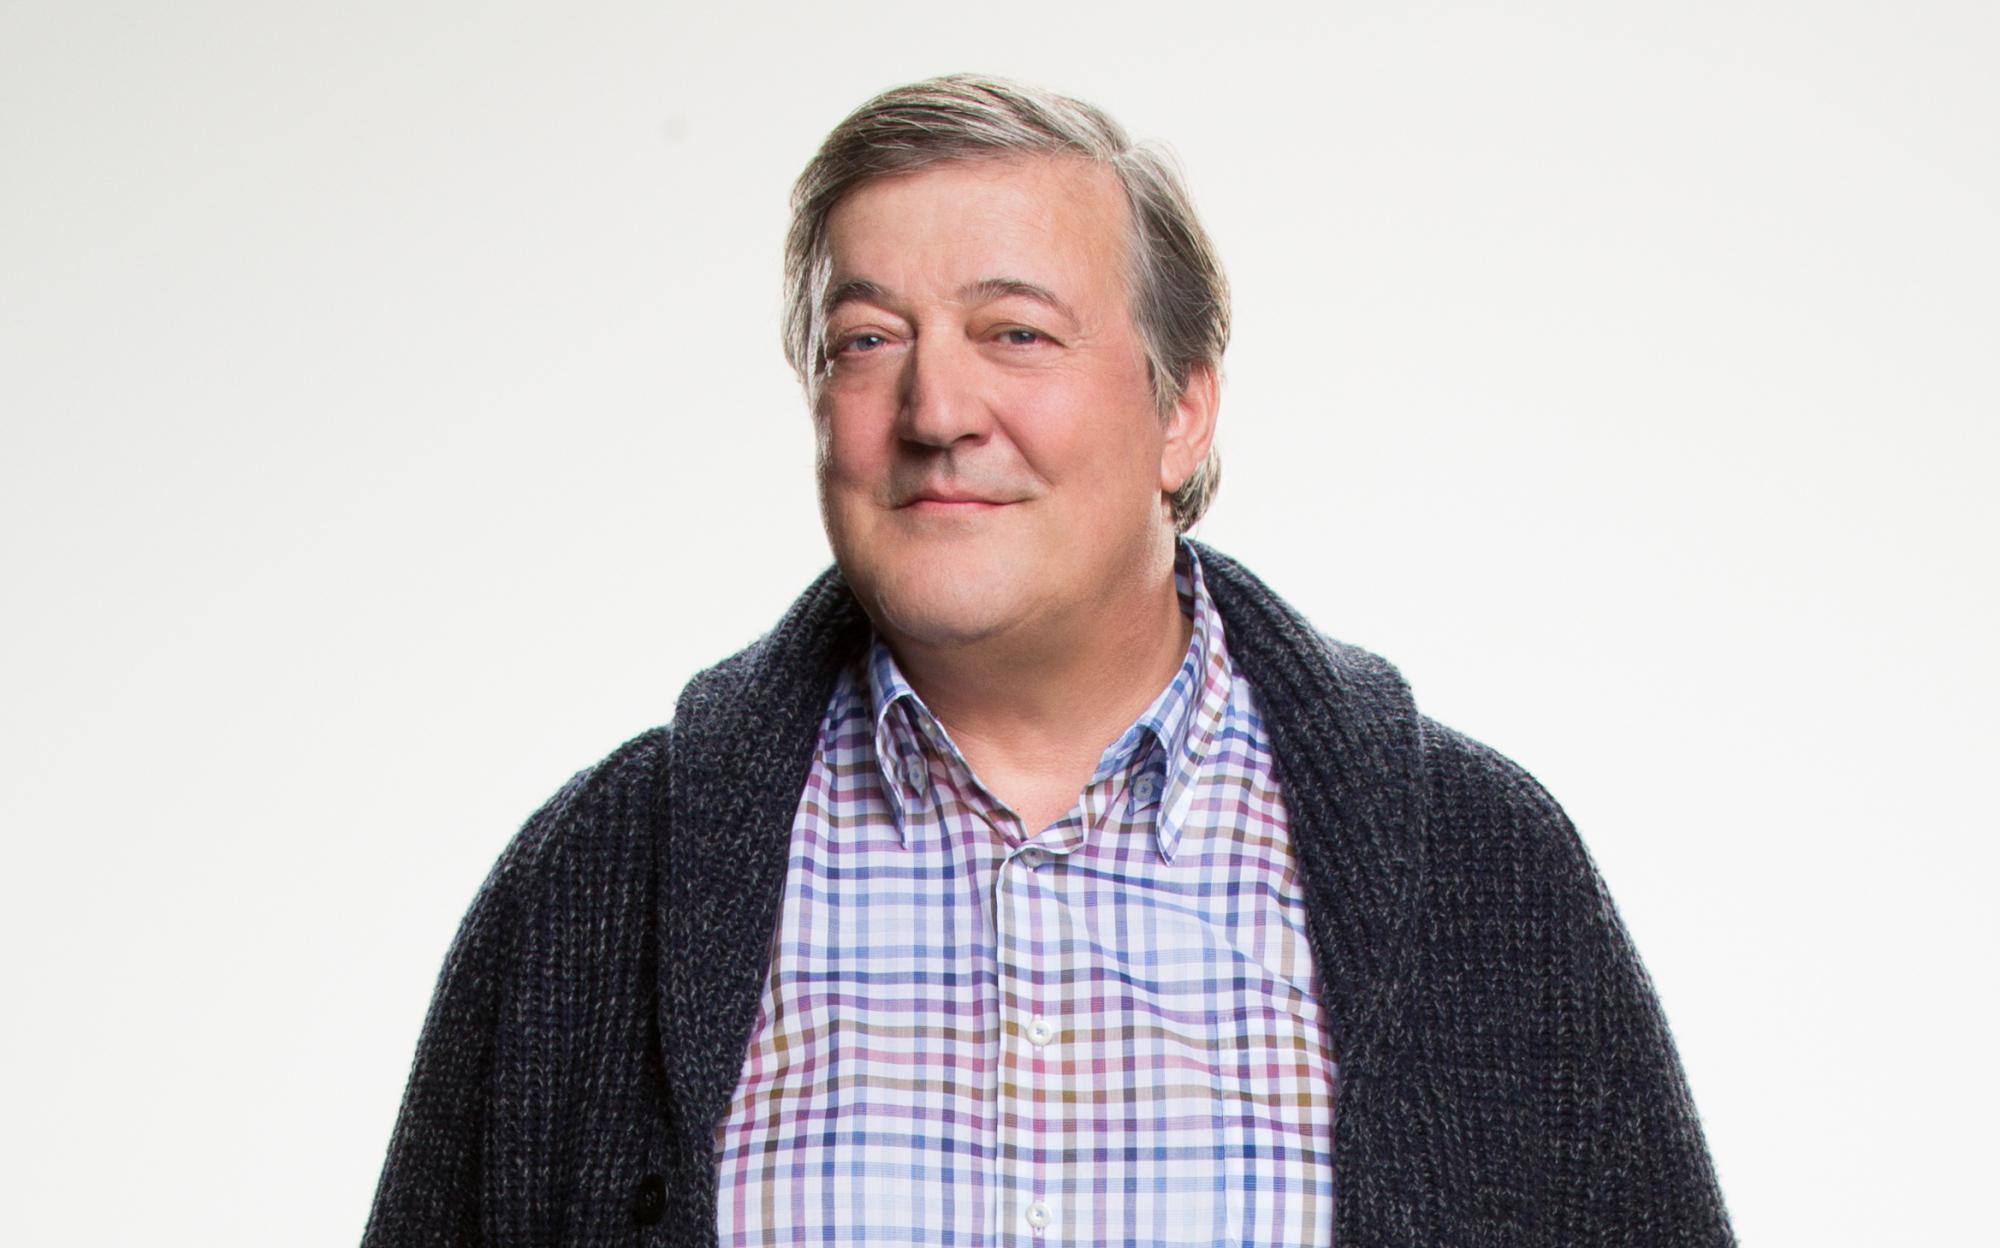 Stephen Fry smiling and wearing a checkered shirt and cardigan